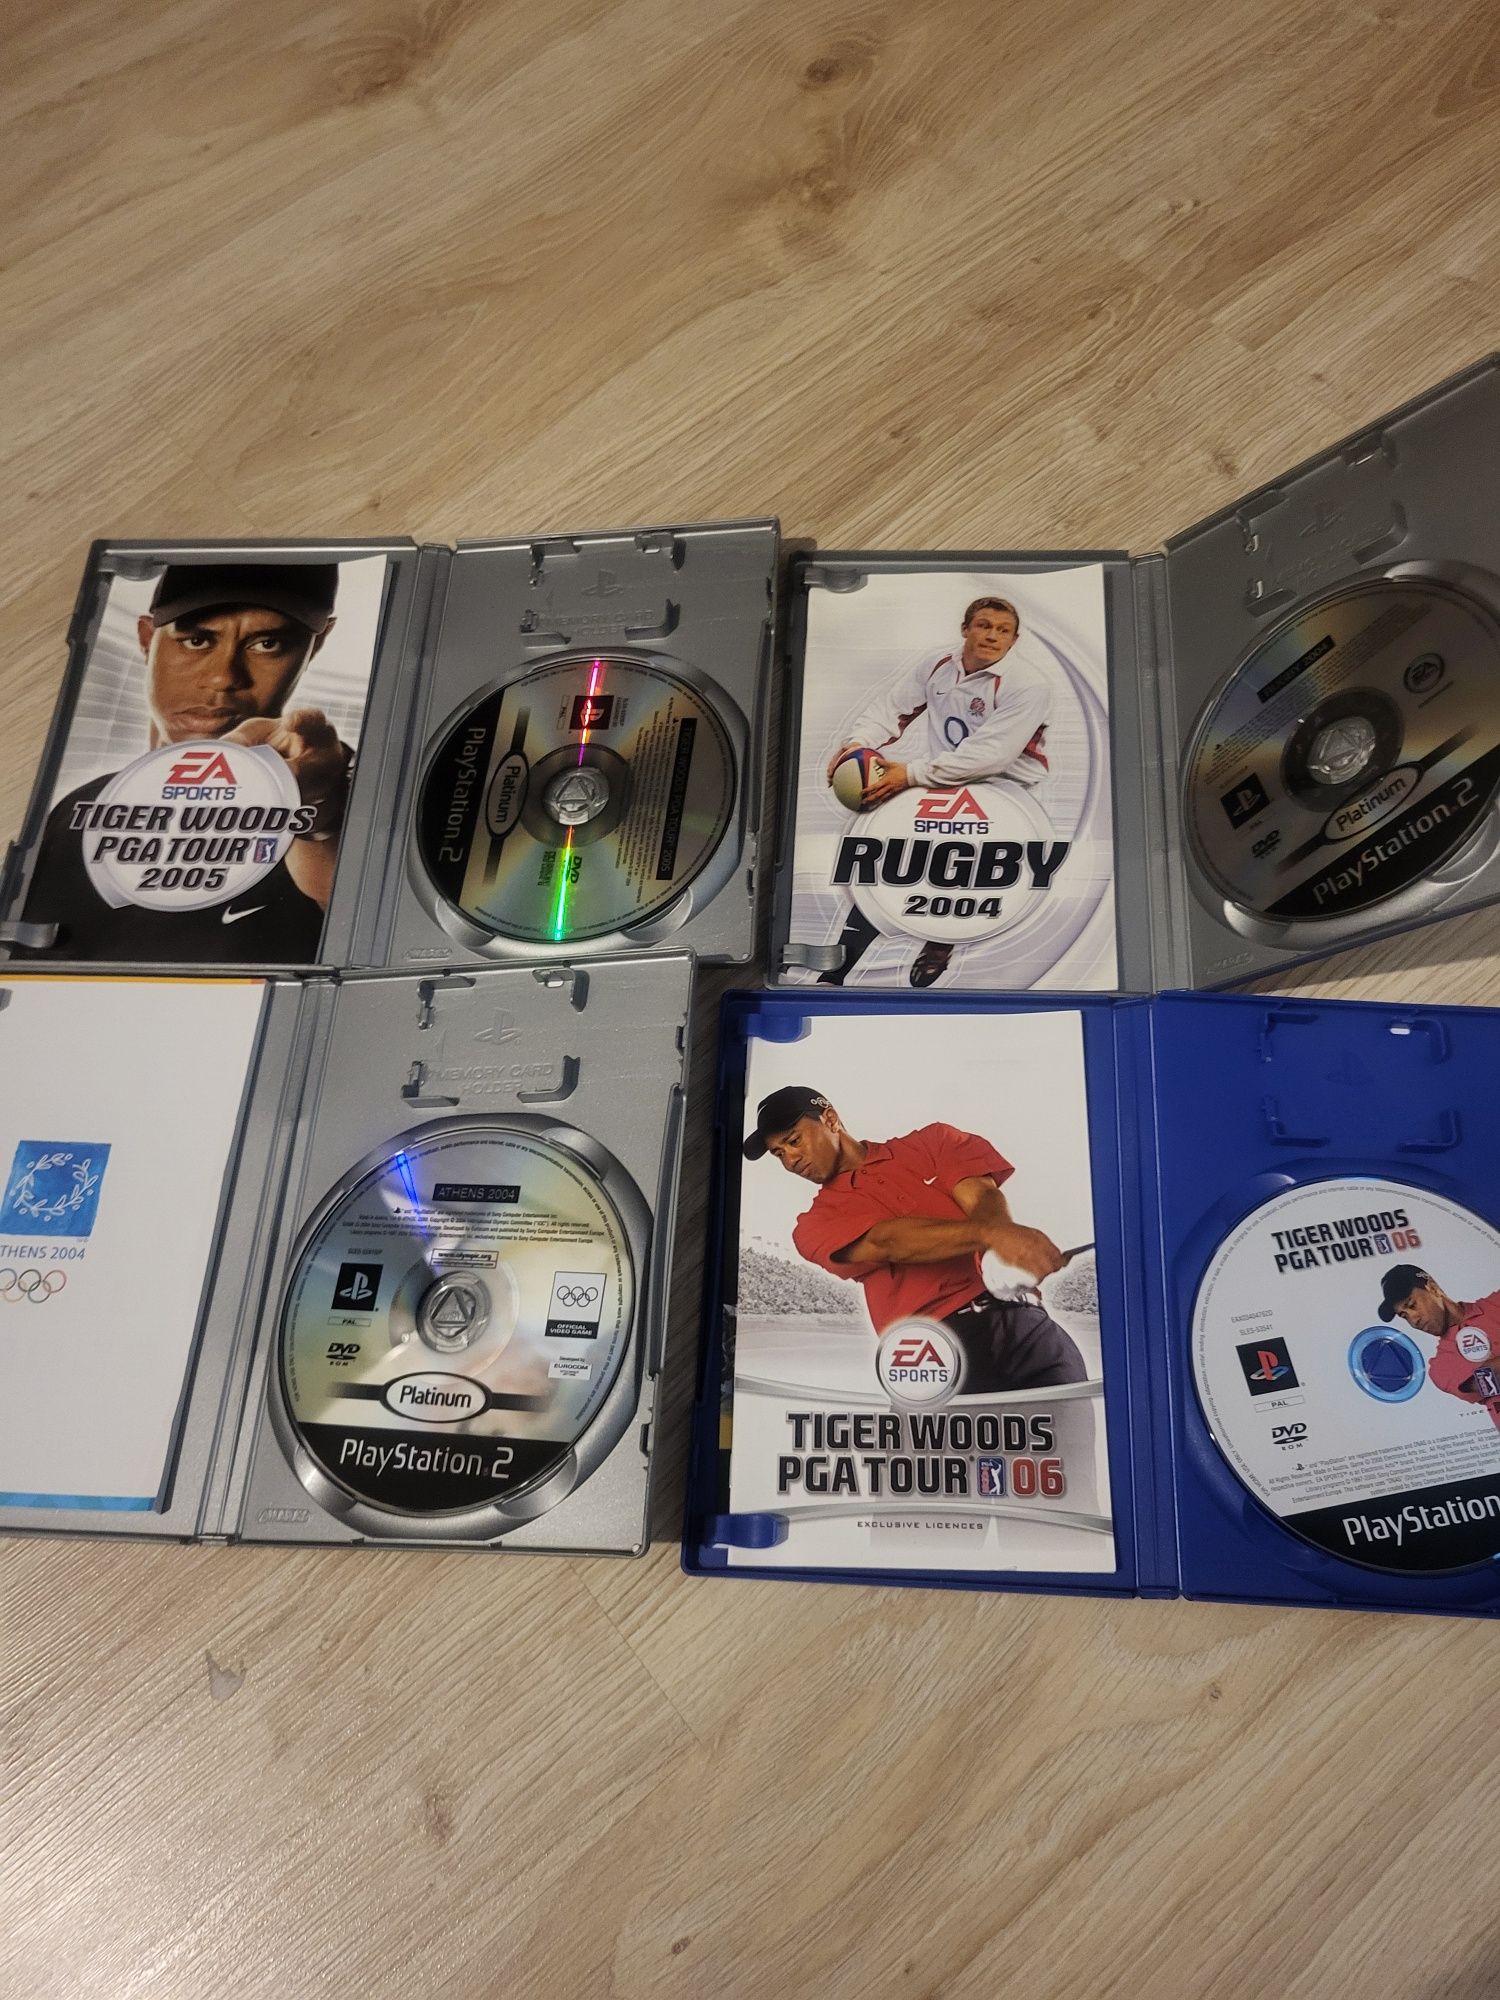 Ps2 gry tiger woods, tomb rider inne